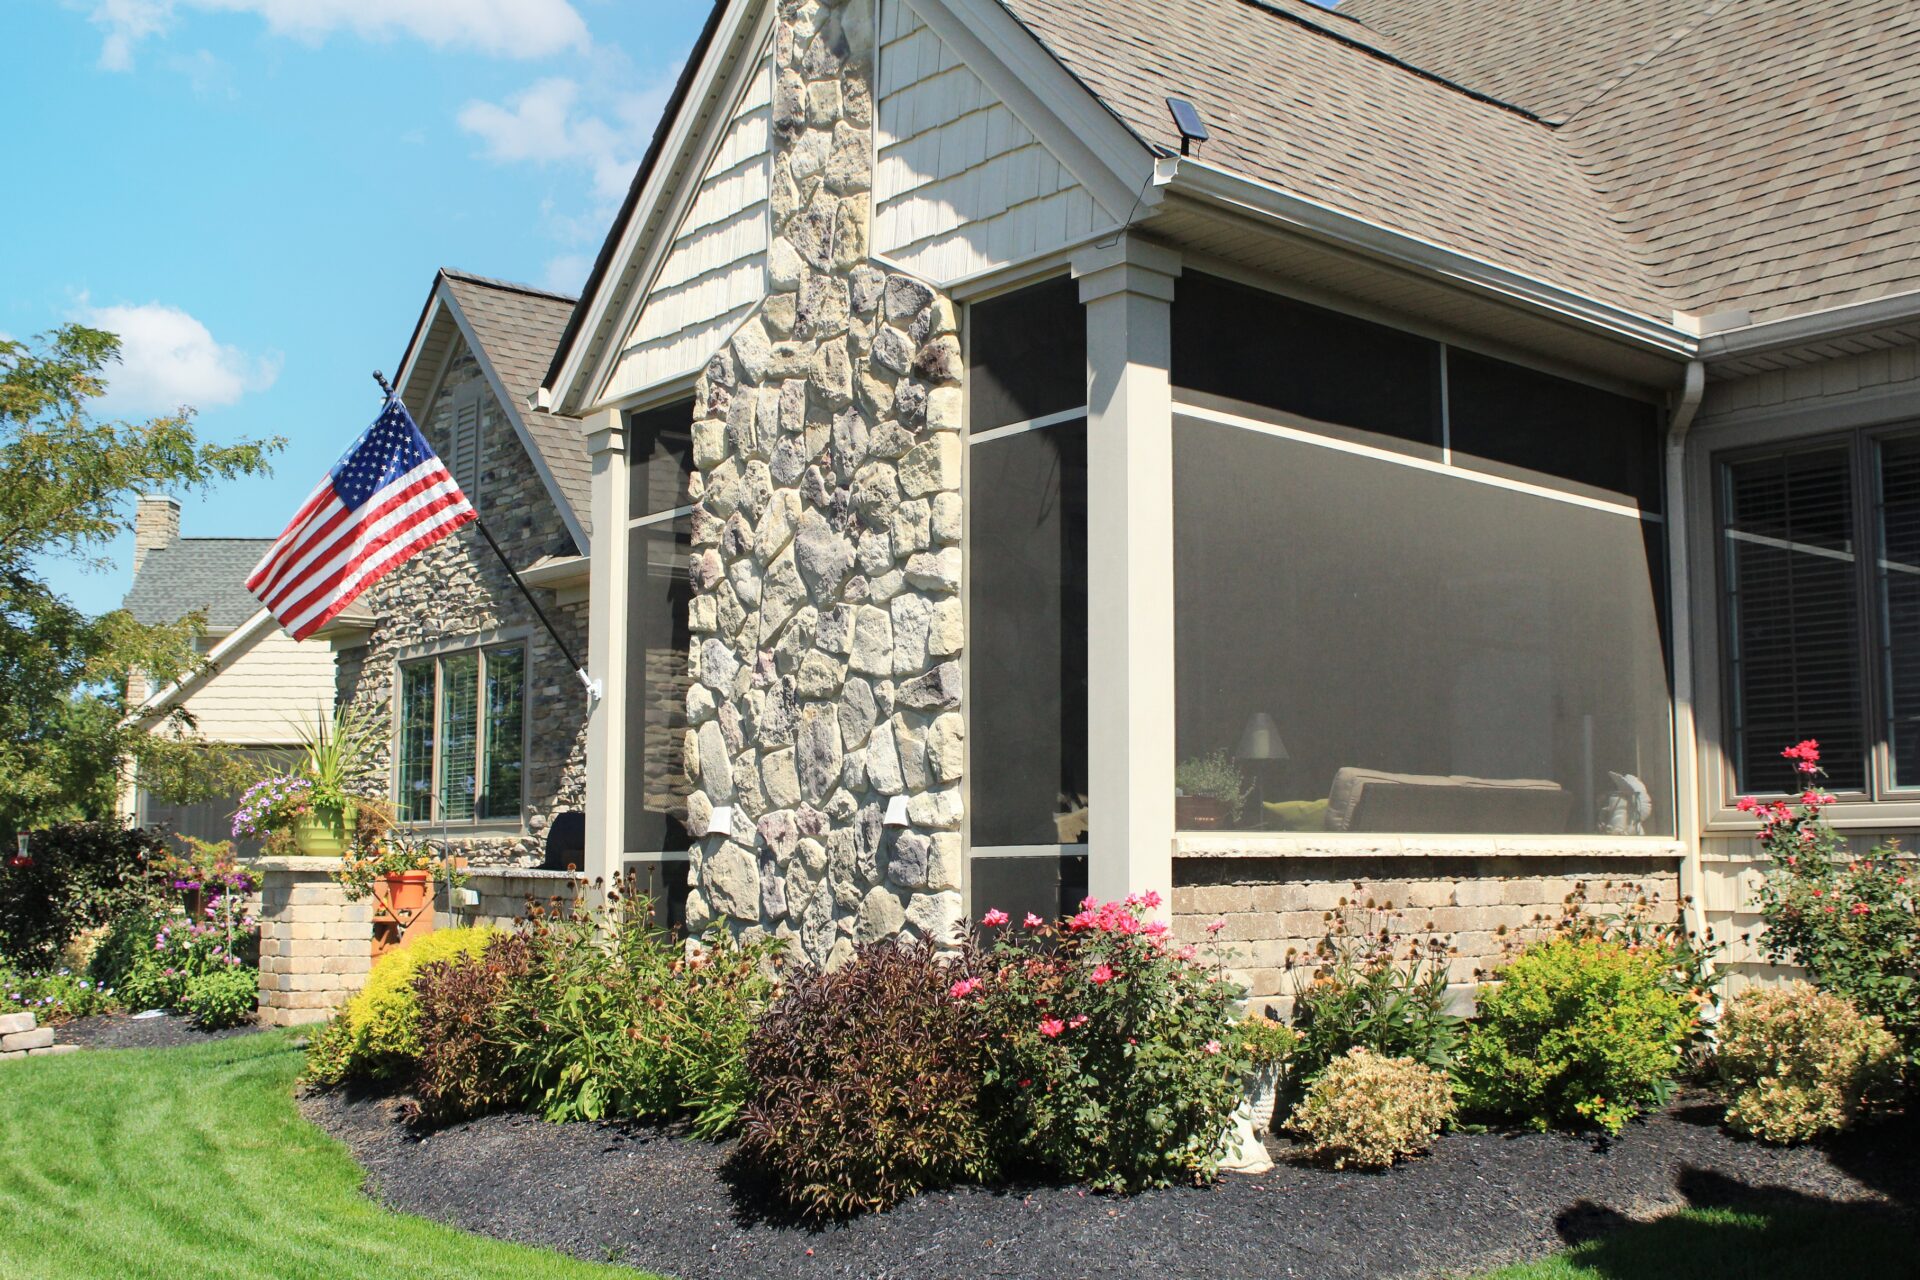 Screening Solutions Ohio uses custom permanent screening to enclose an outdoor patio in Northeast Ohio.